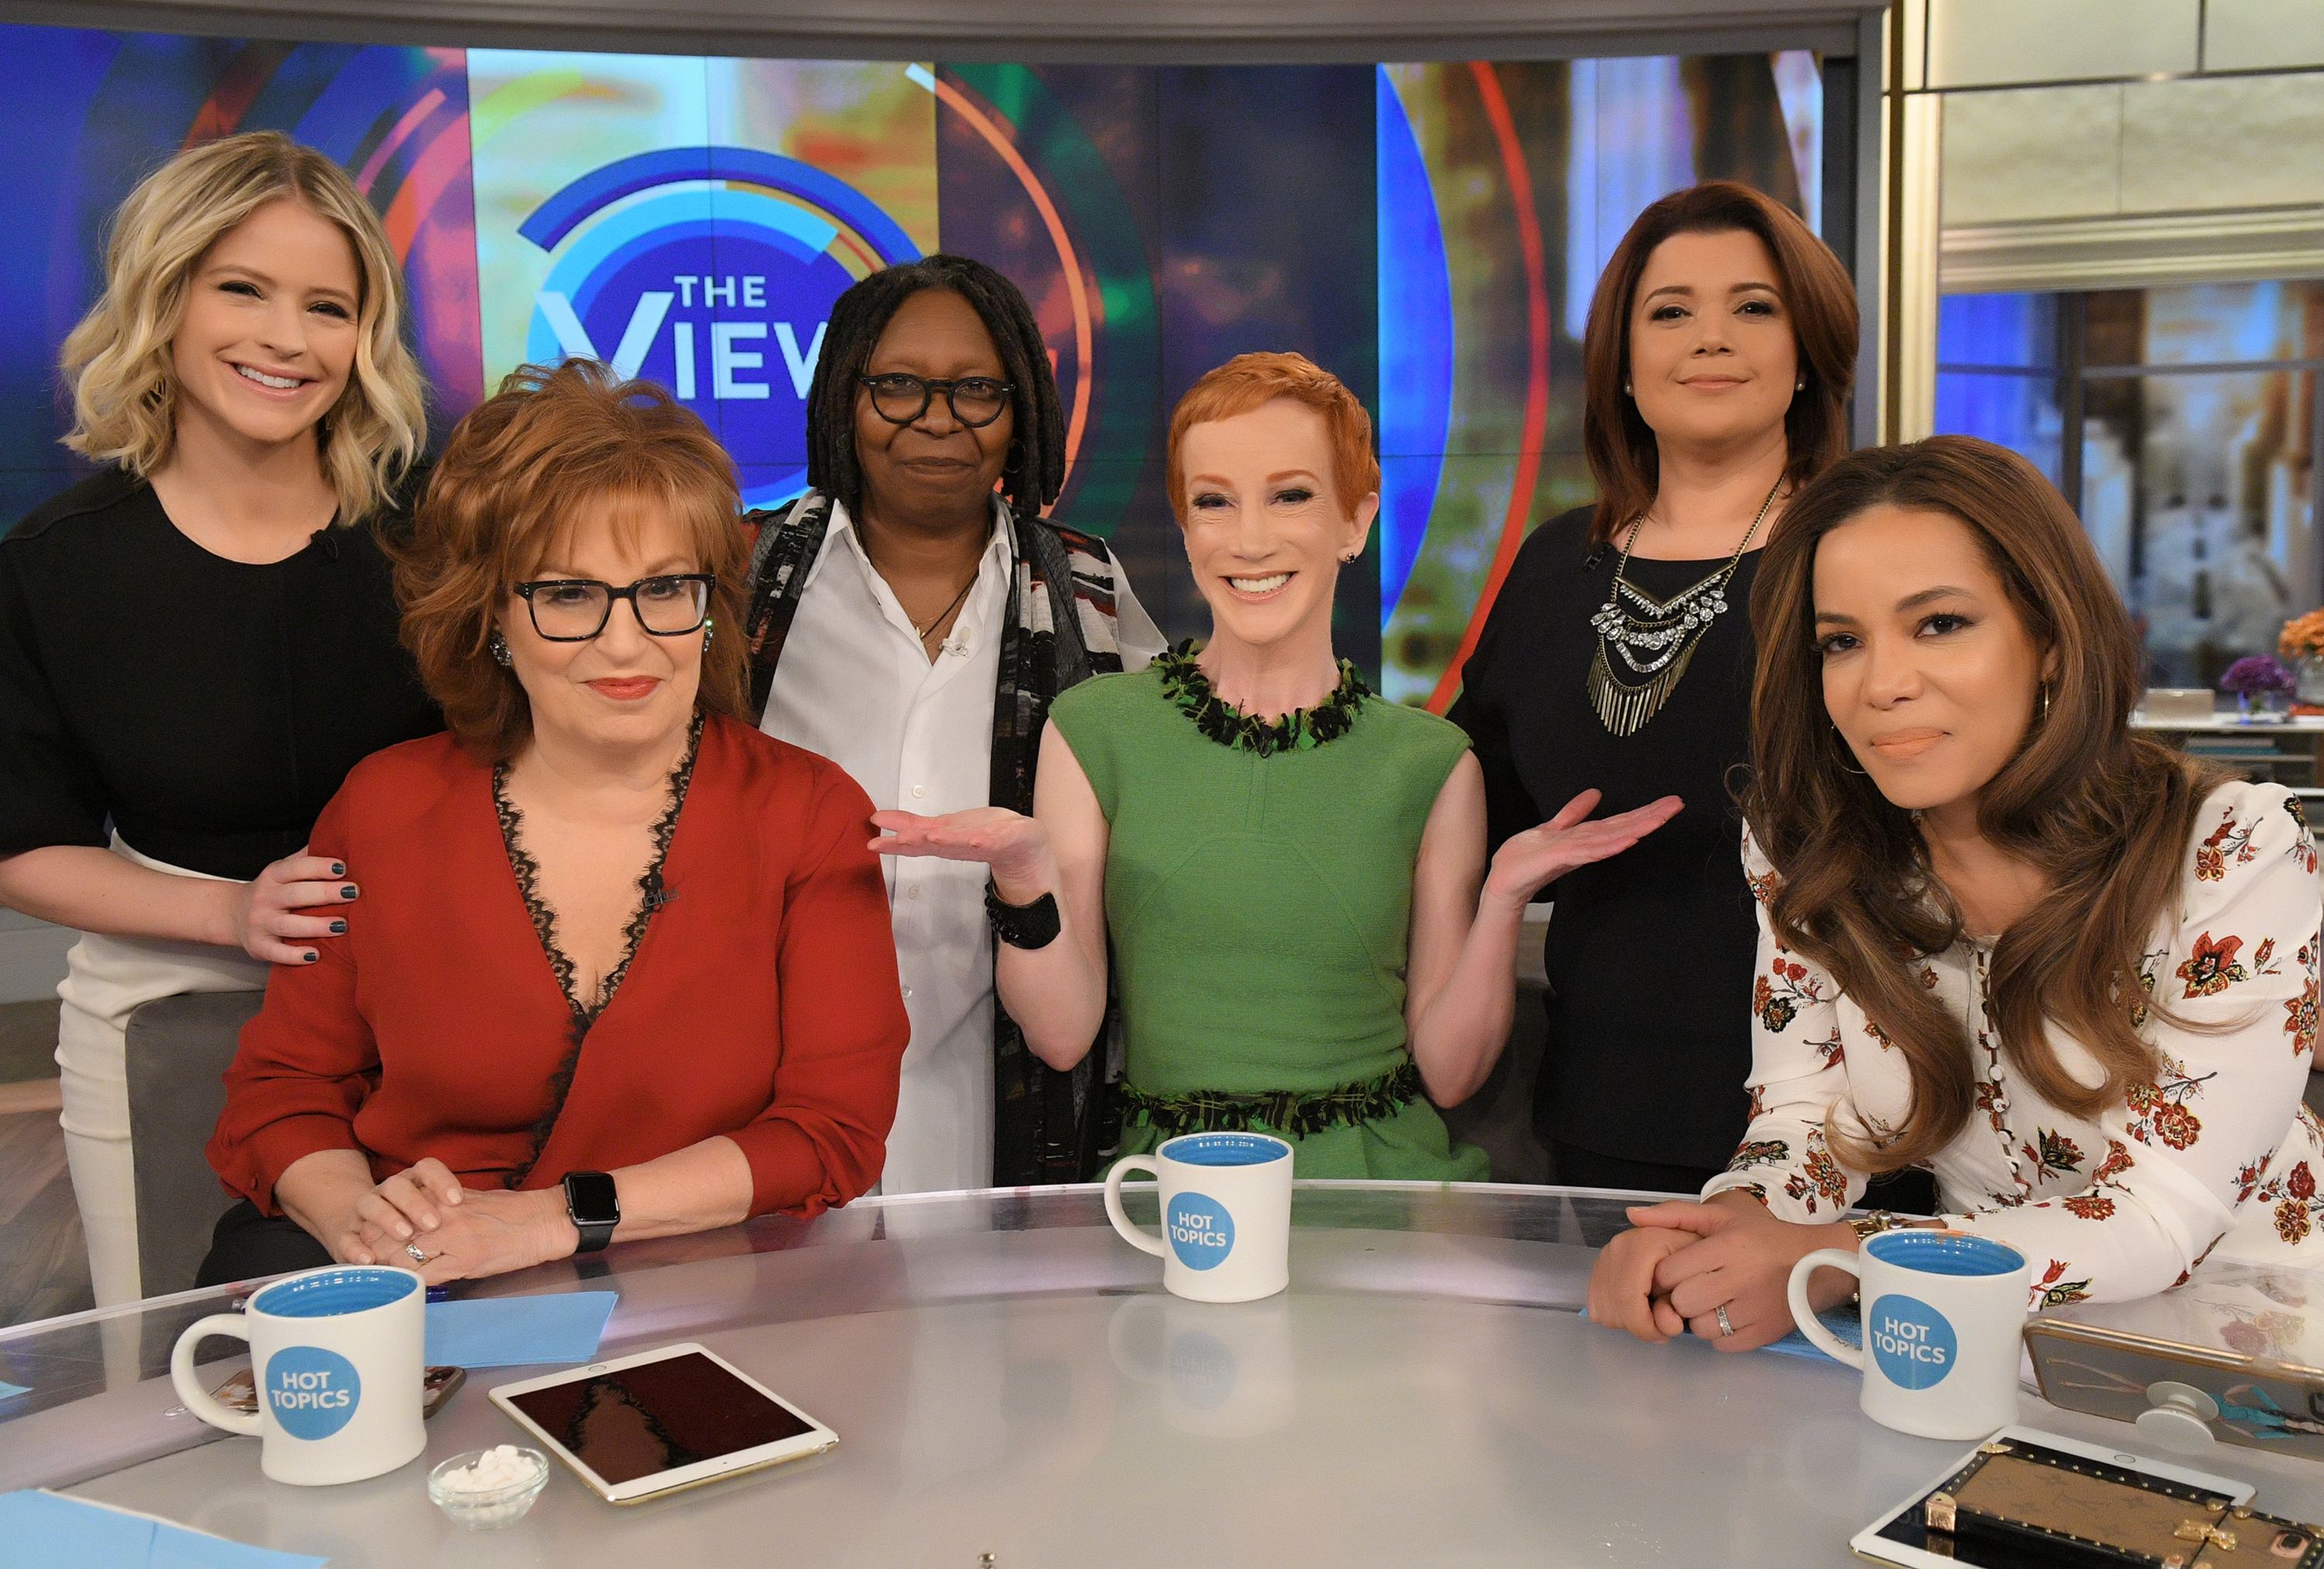 Kathy Griffin with her "The View" cast mates. | Source: Getty Images